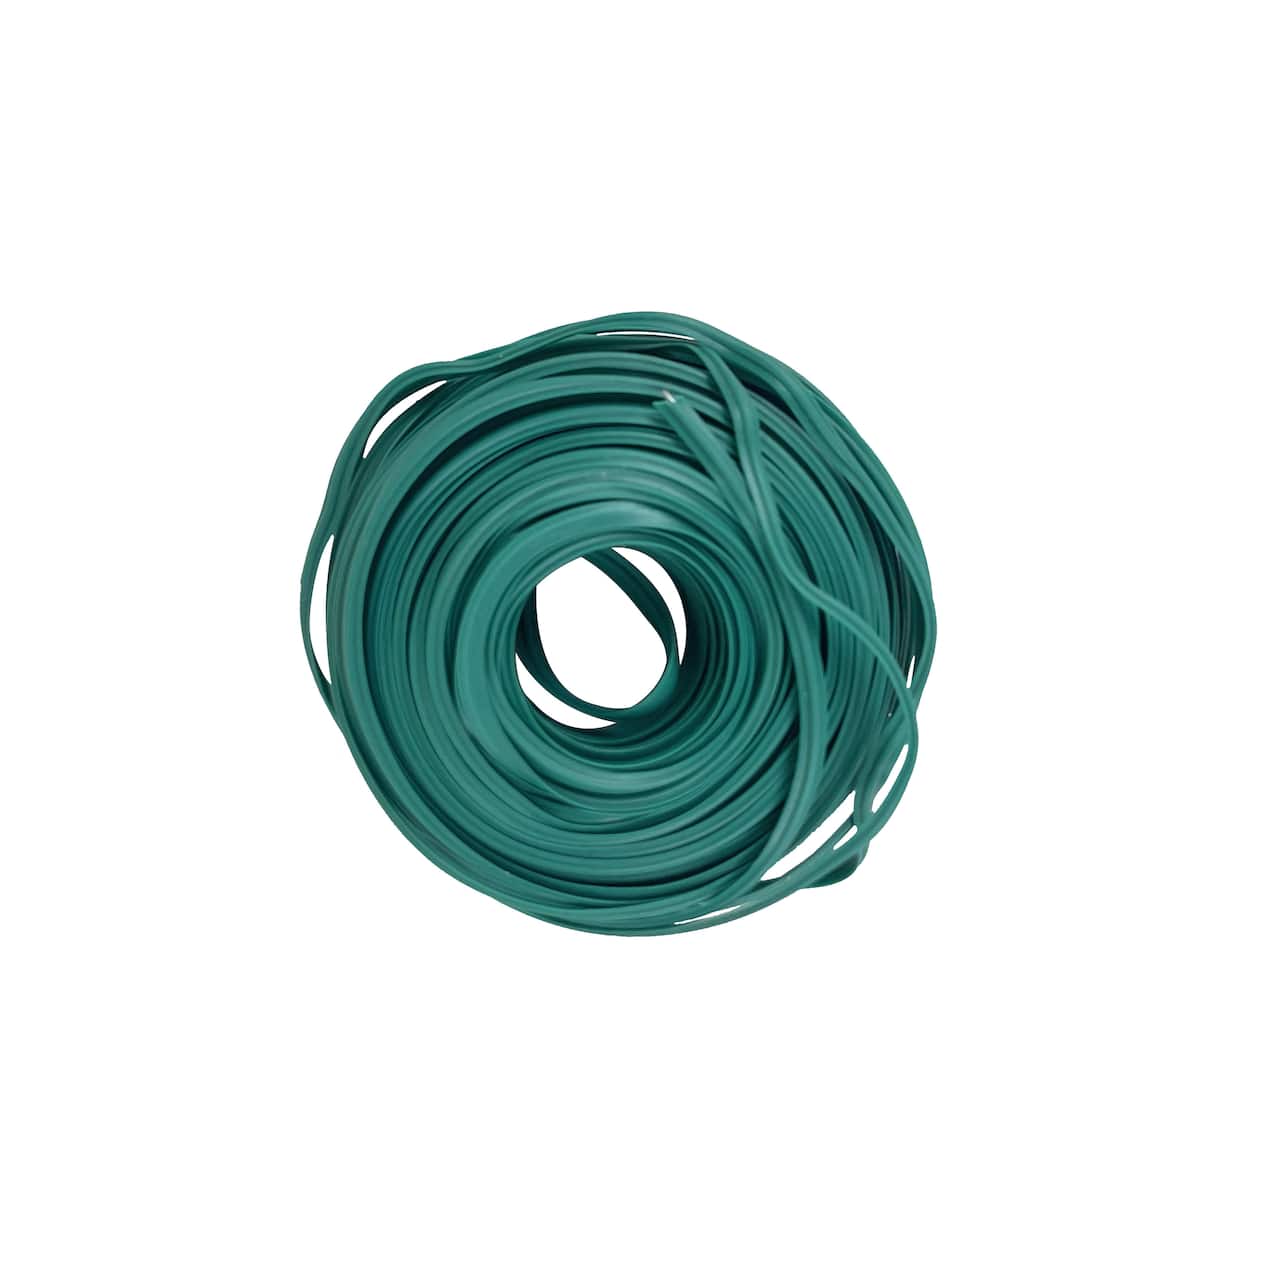 24 Pack: 26 Gauge Green Floral Wire with Cutter by Ashland®